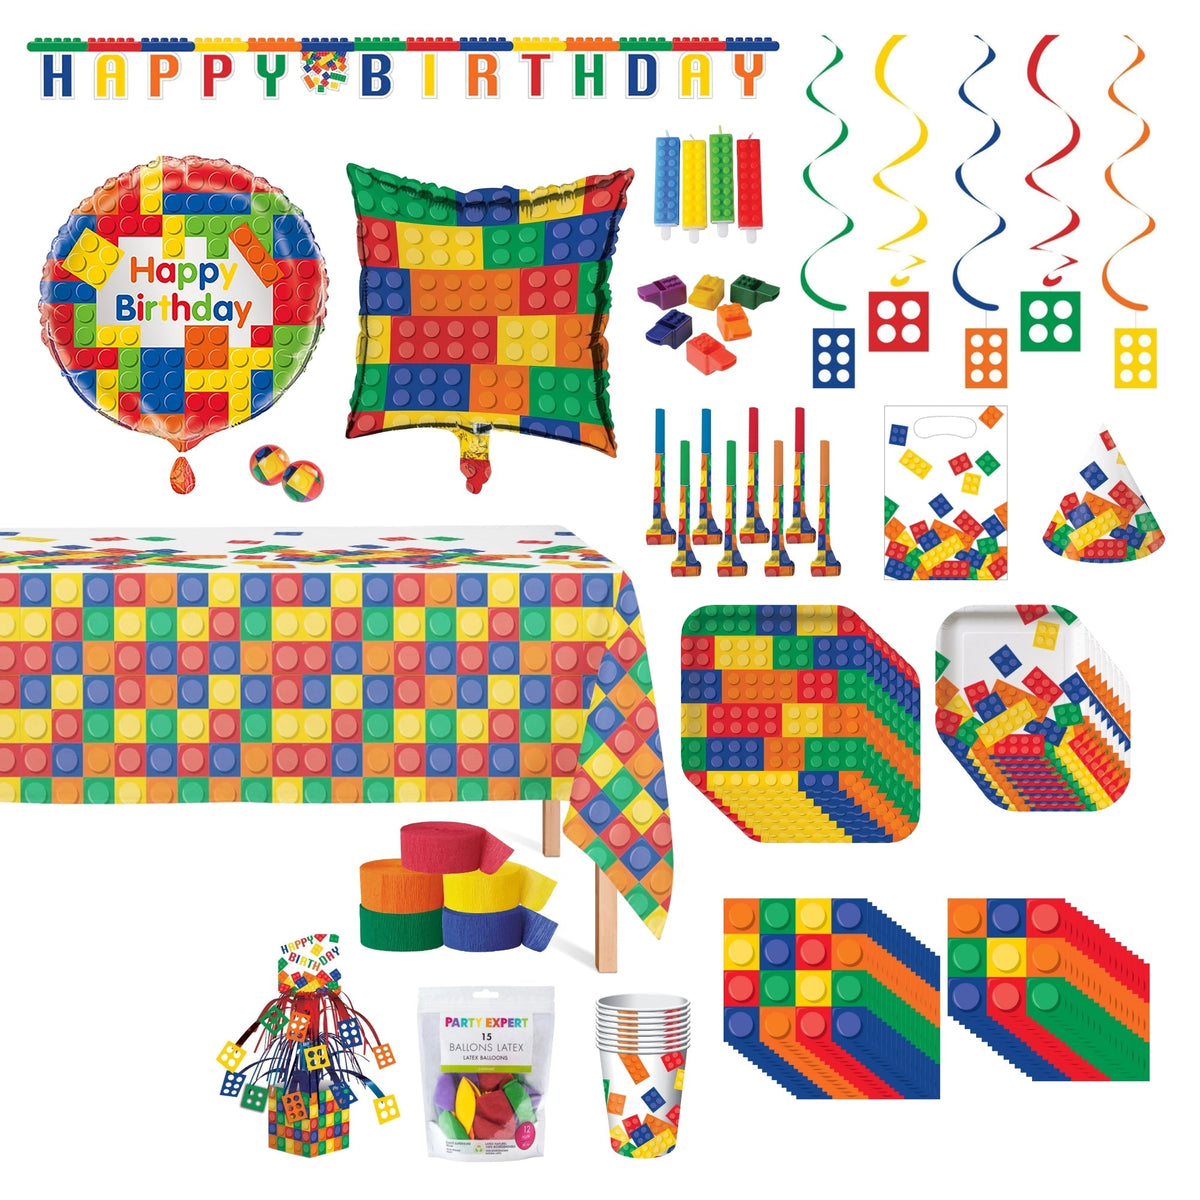 Party Expert Kids Birthday Block Party Ultimate Birthday Party Supplies Kit